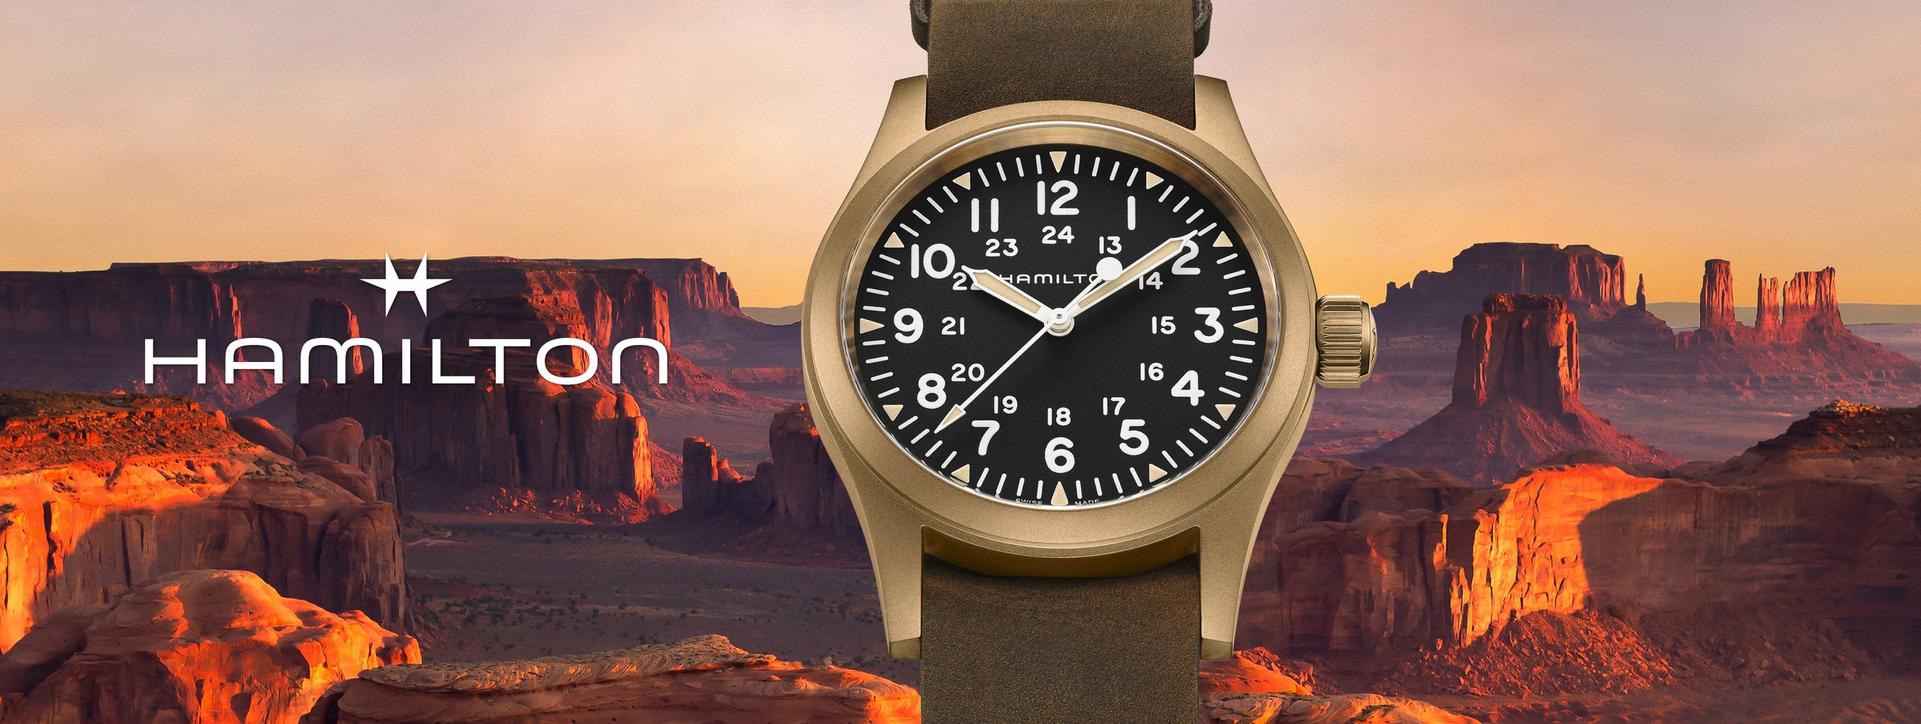 Hamilton watches are all about quality, technology and design and are some of the finest watches in the world.